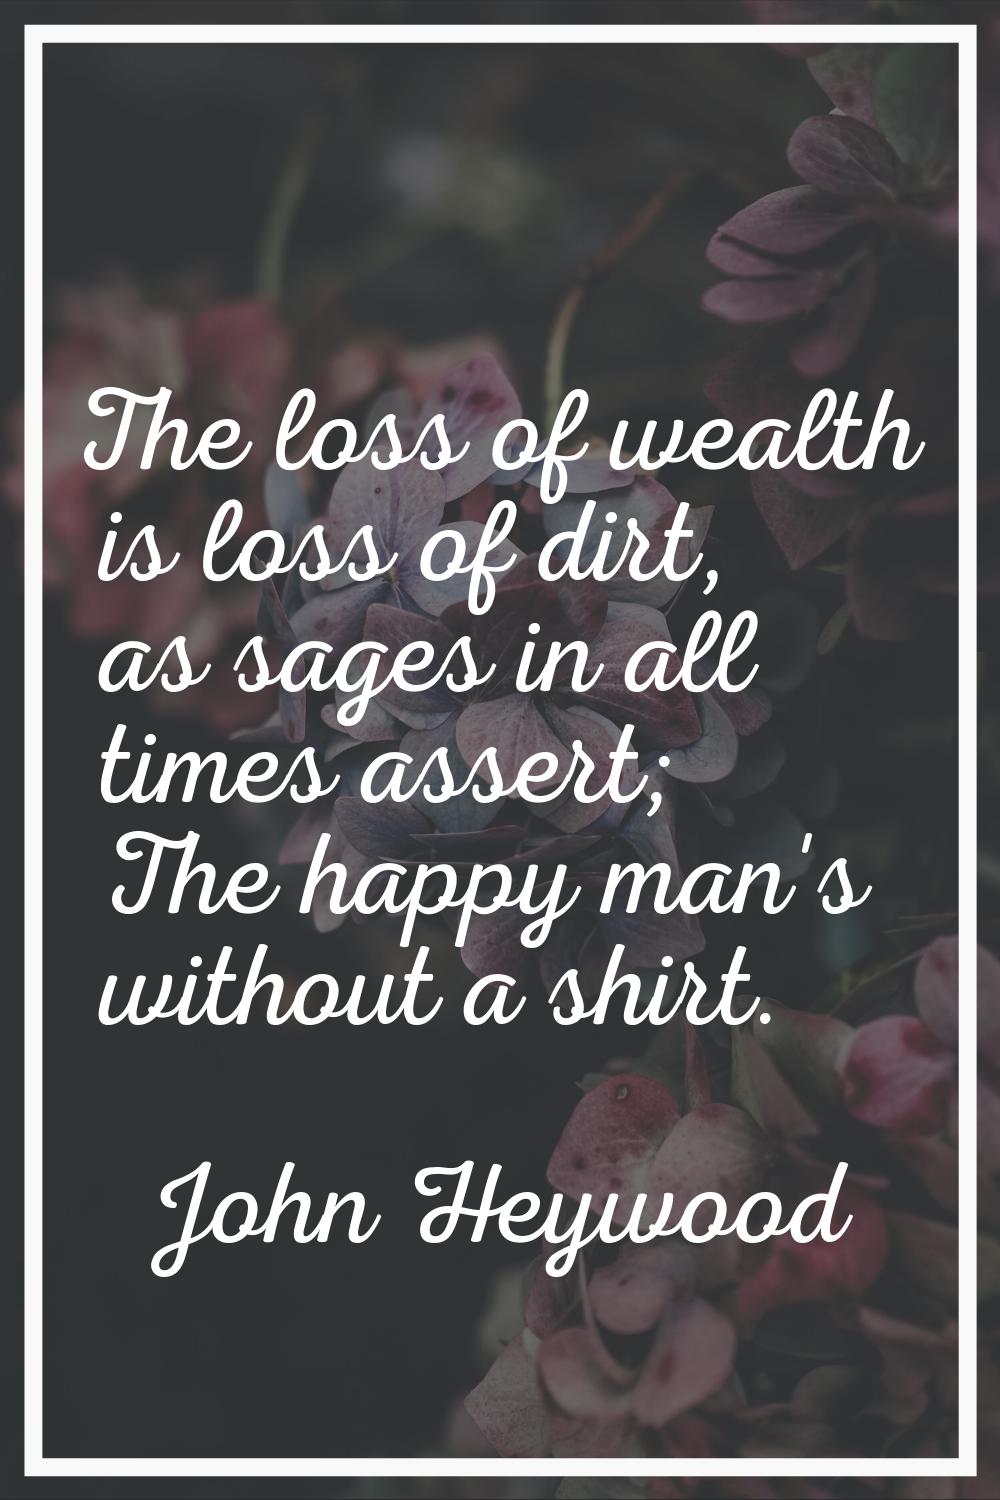 The loss of wealth is loss of dirt, as sages in all times assert; The happy man's without a shirt.